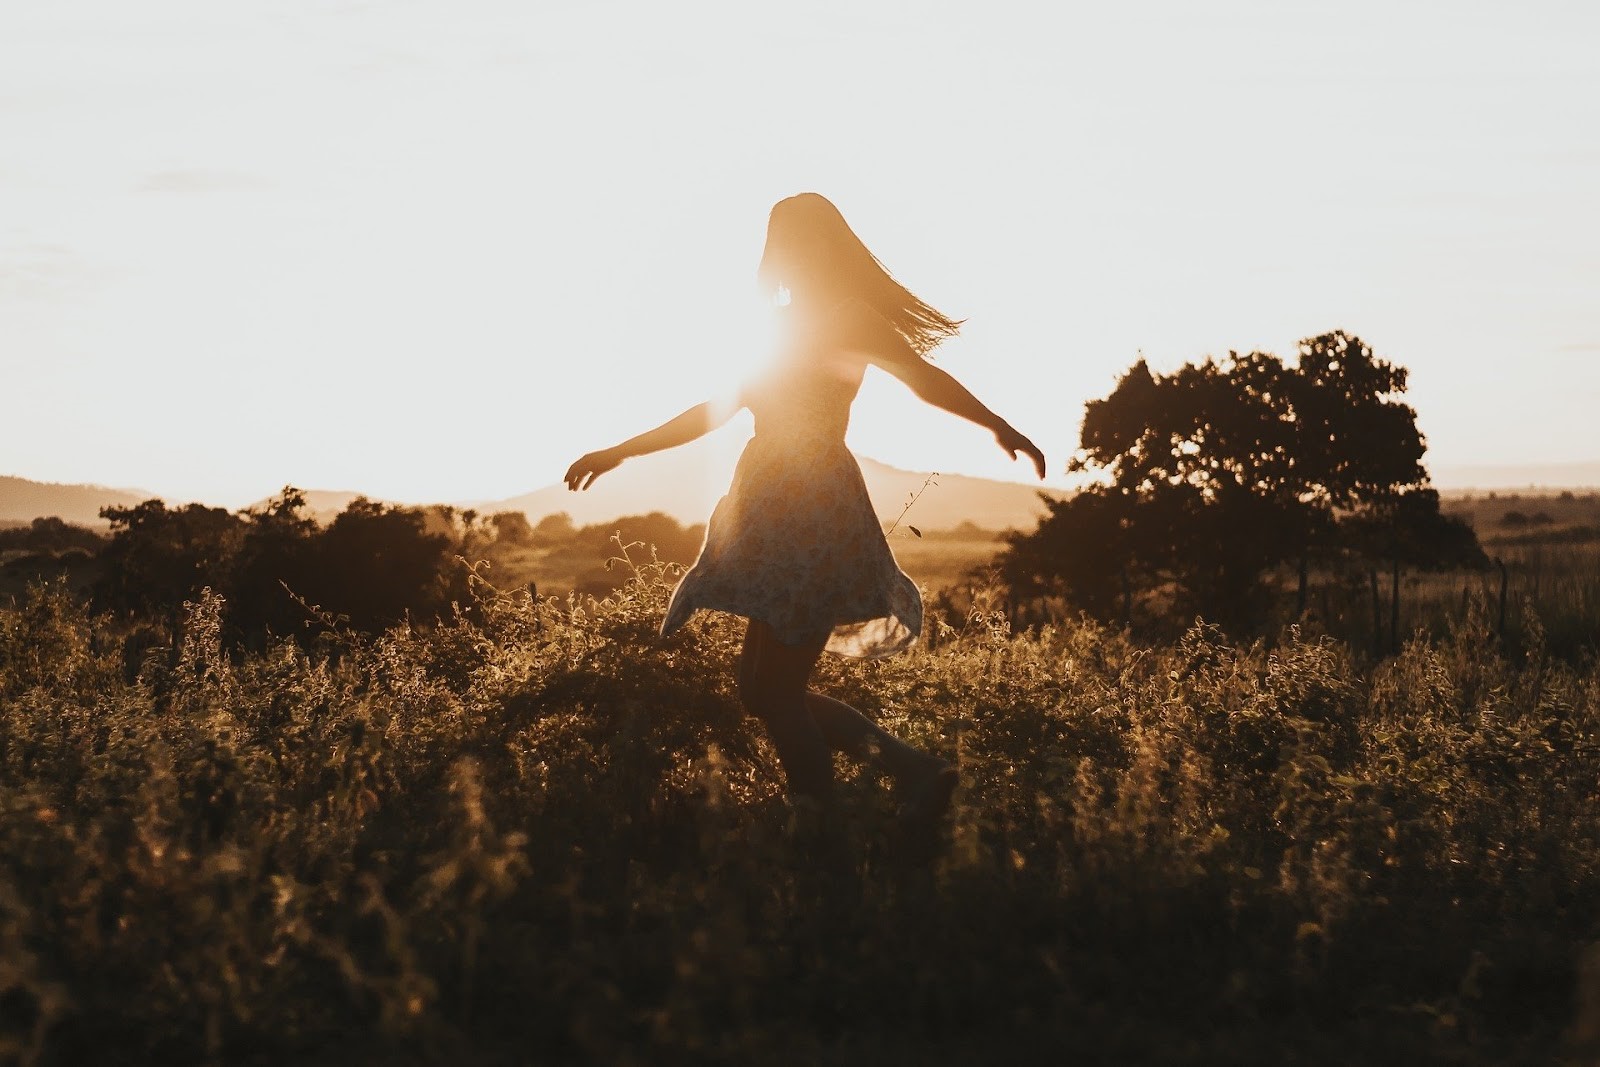 Girl walking in the fields with arms outstretched